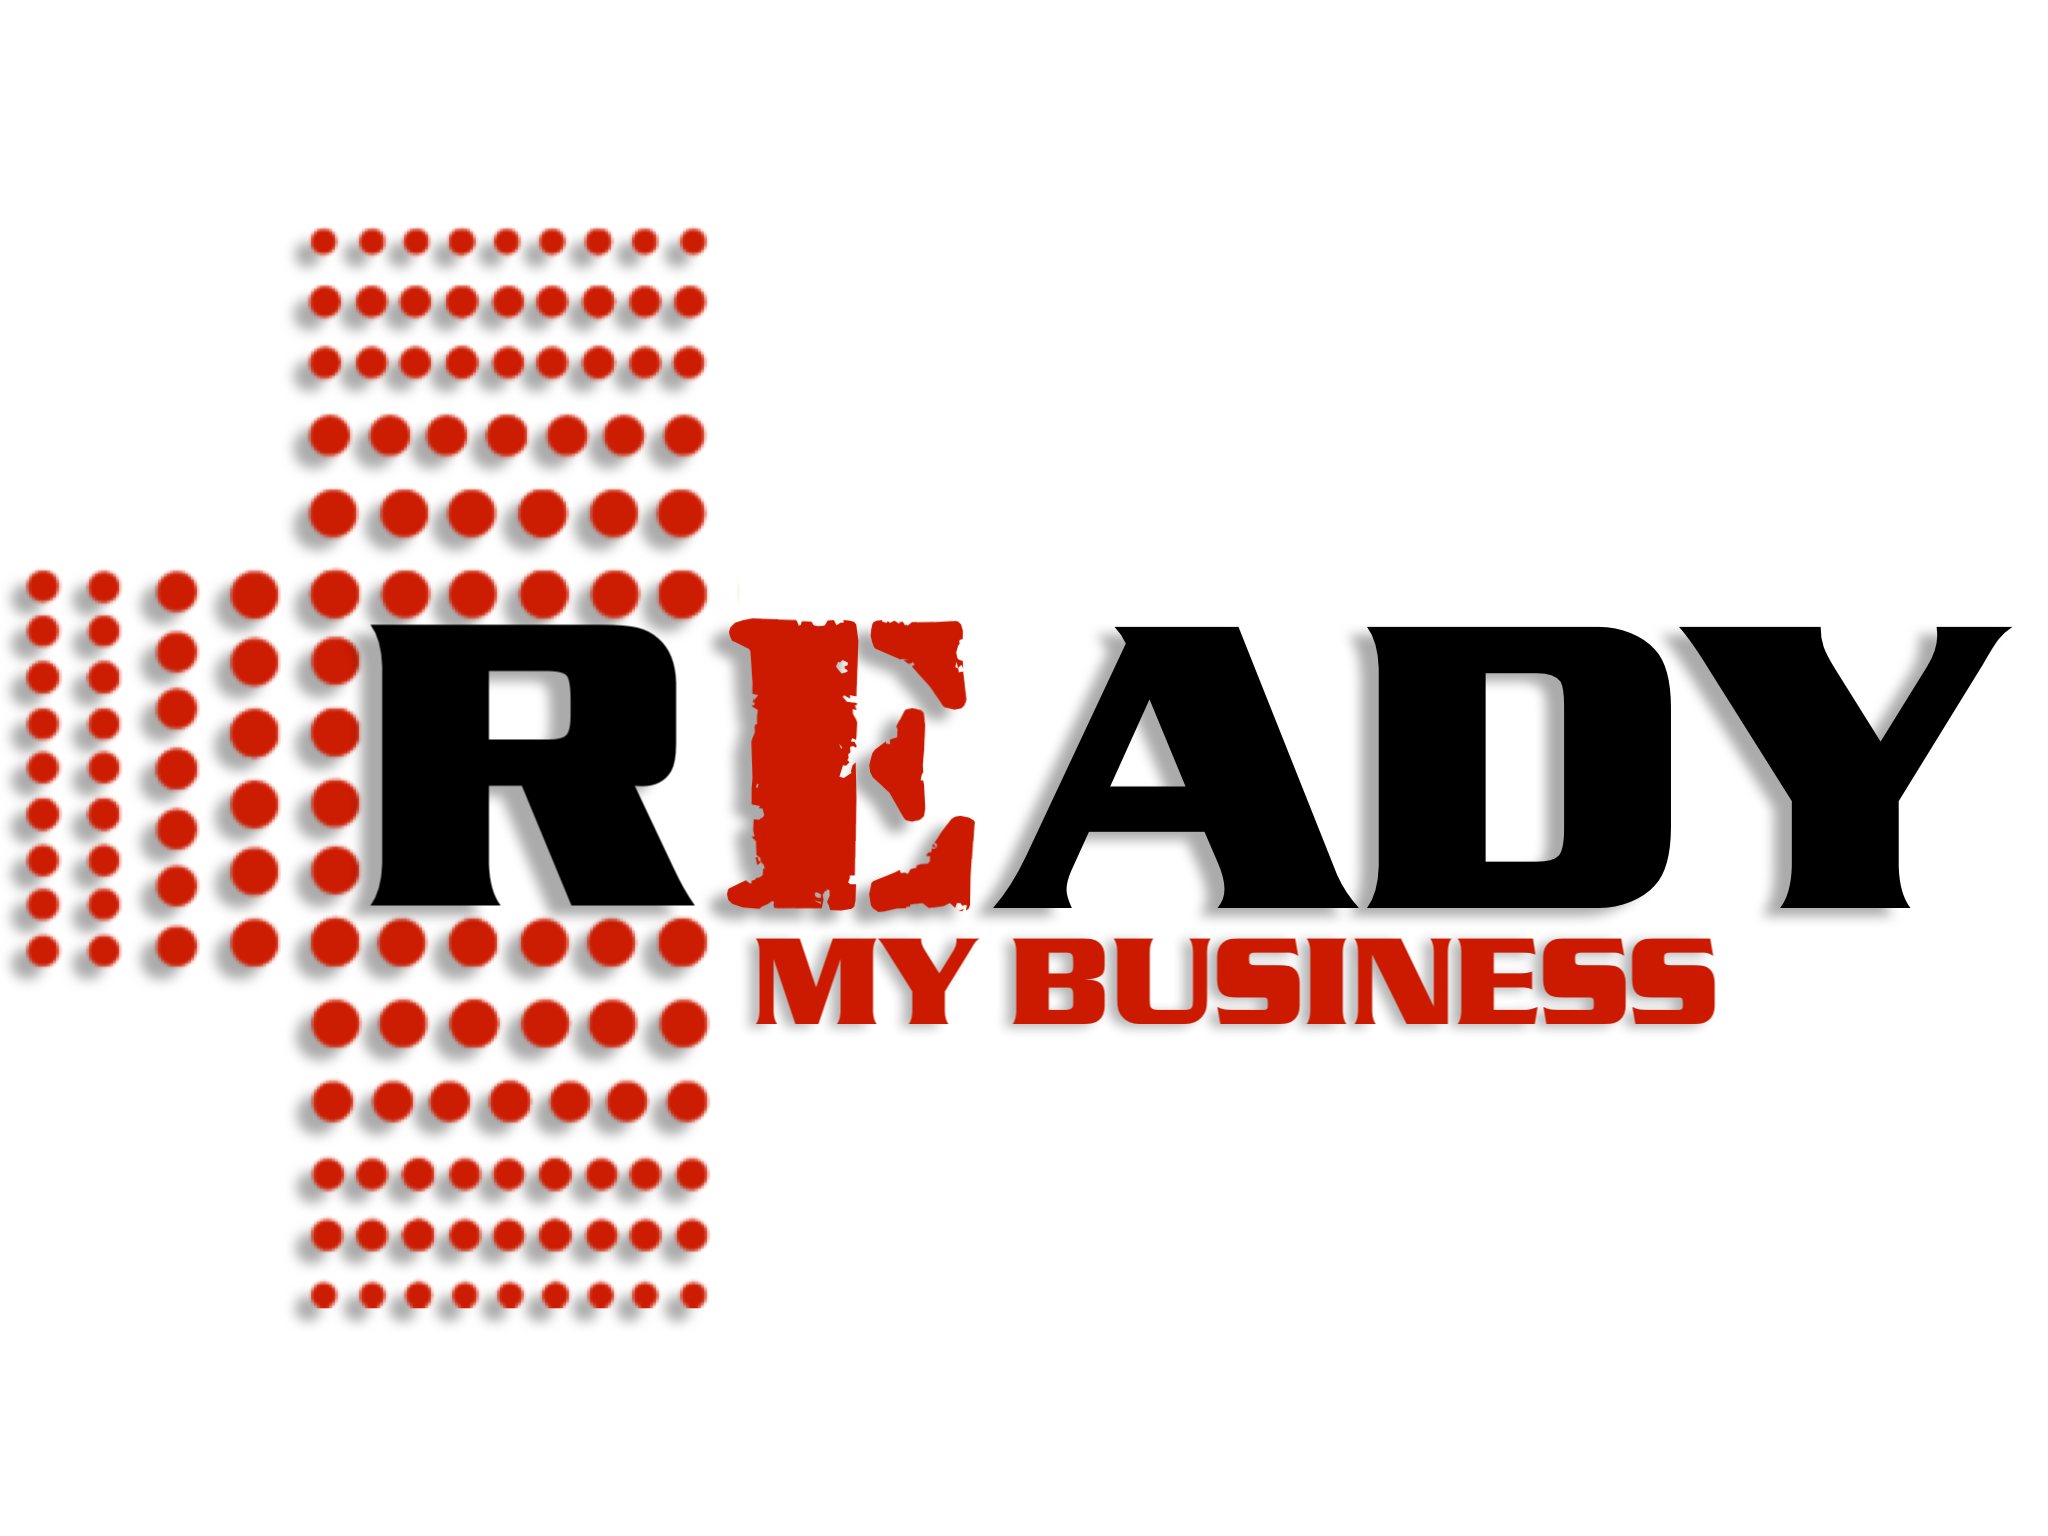 Ready My Business